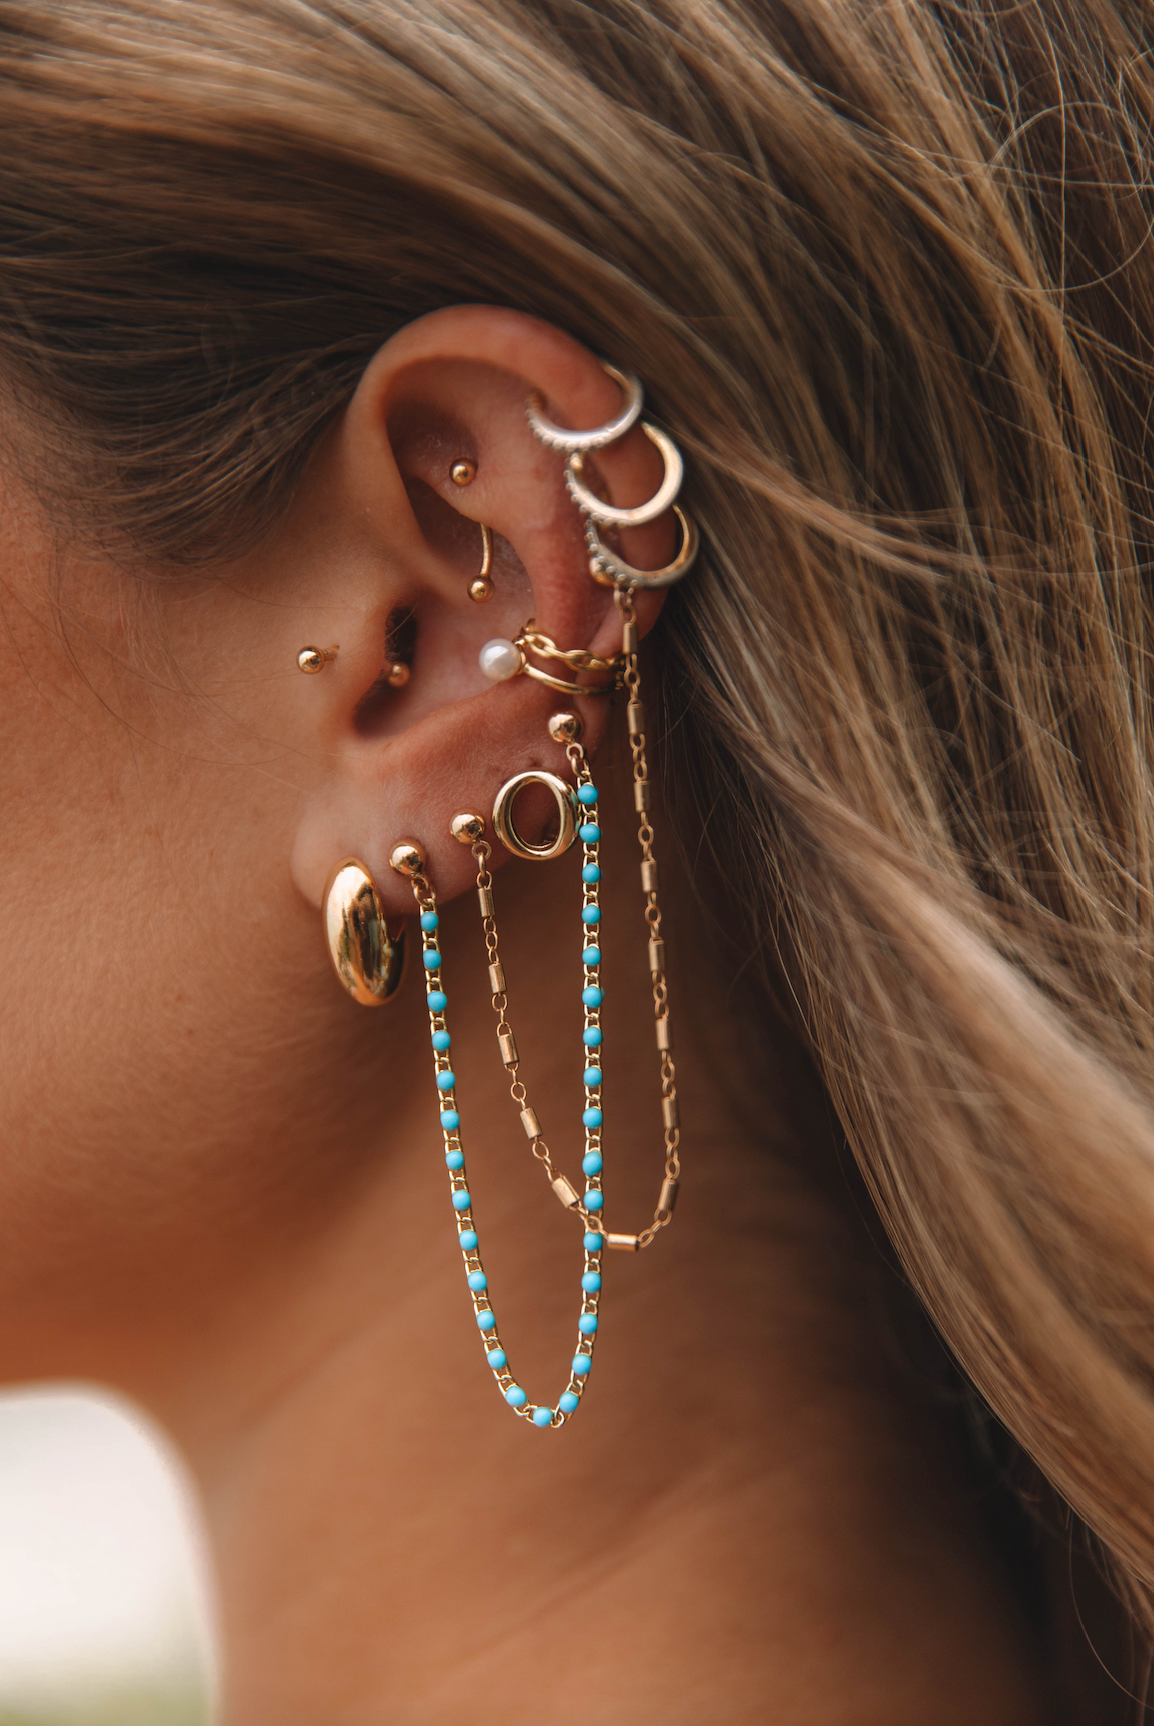 The Double Turquoise Studs